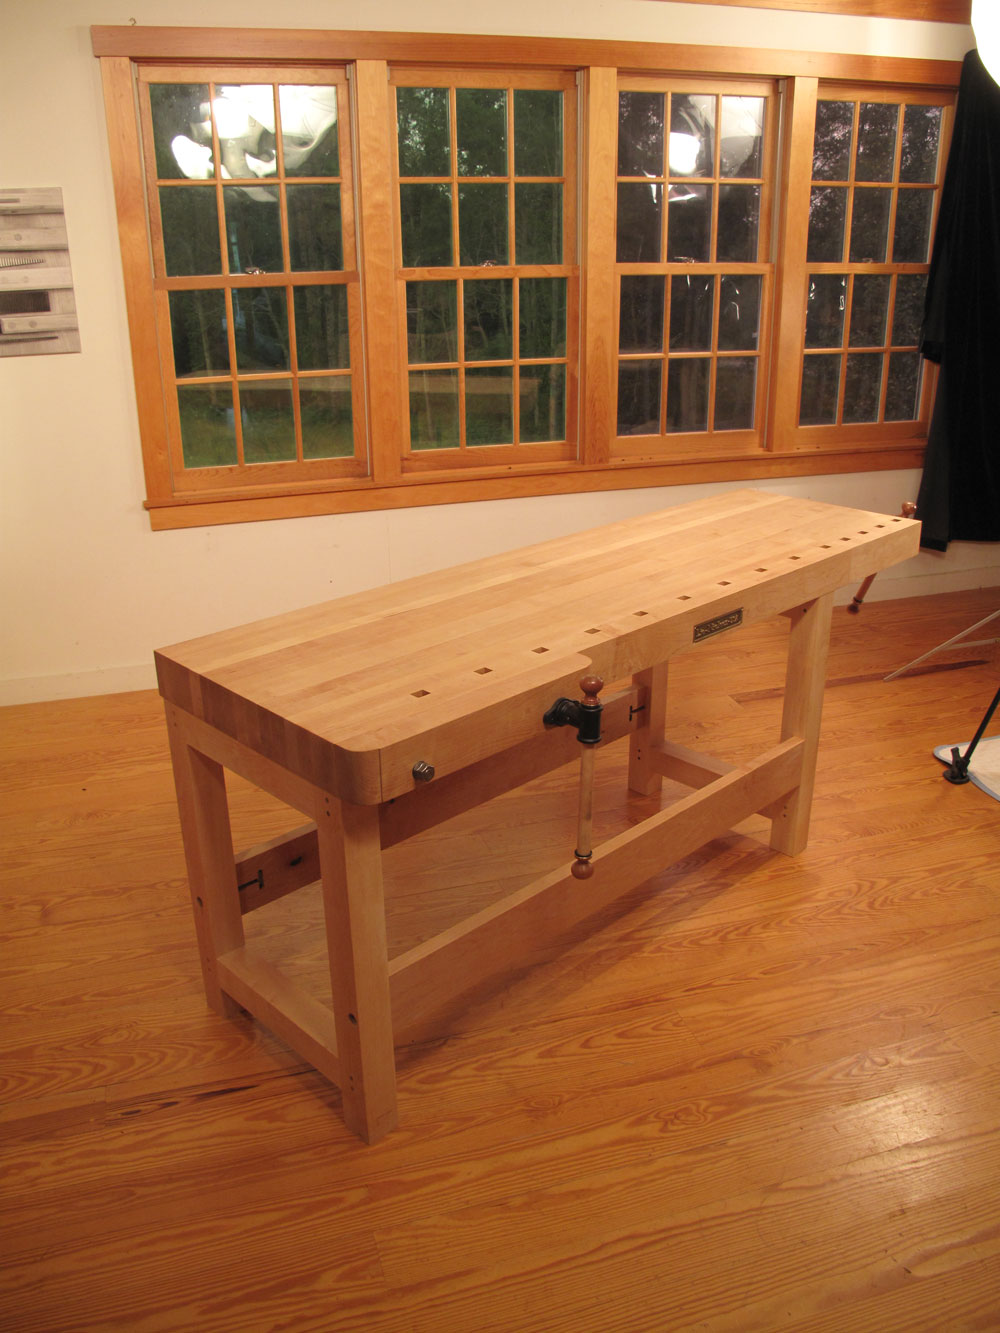 New Workbench from Lie-Nielsen Toolworks - Popular ...